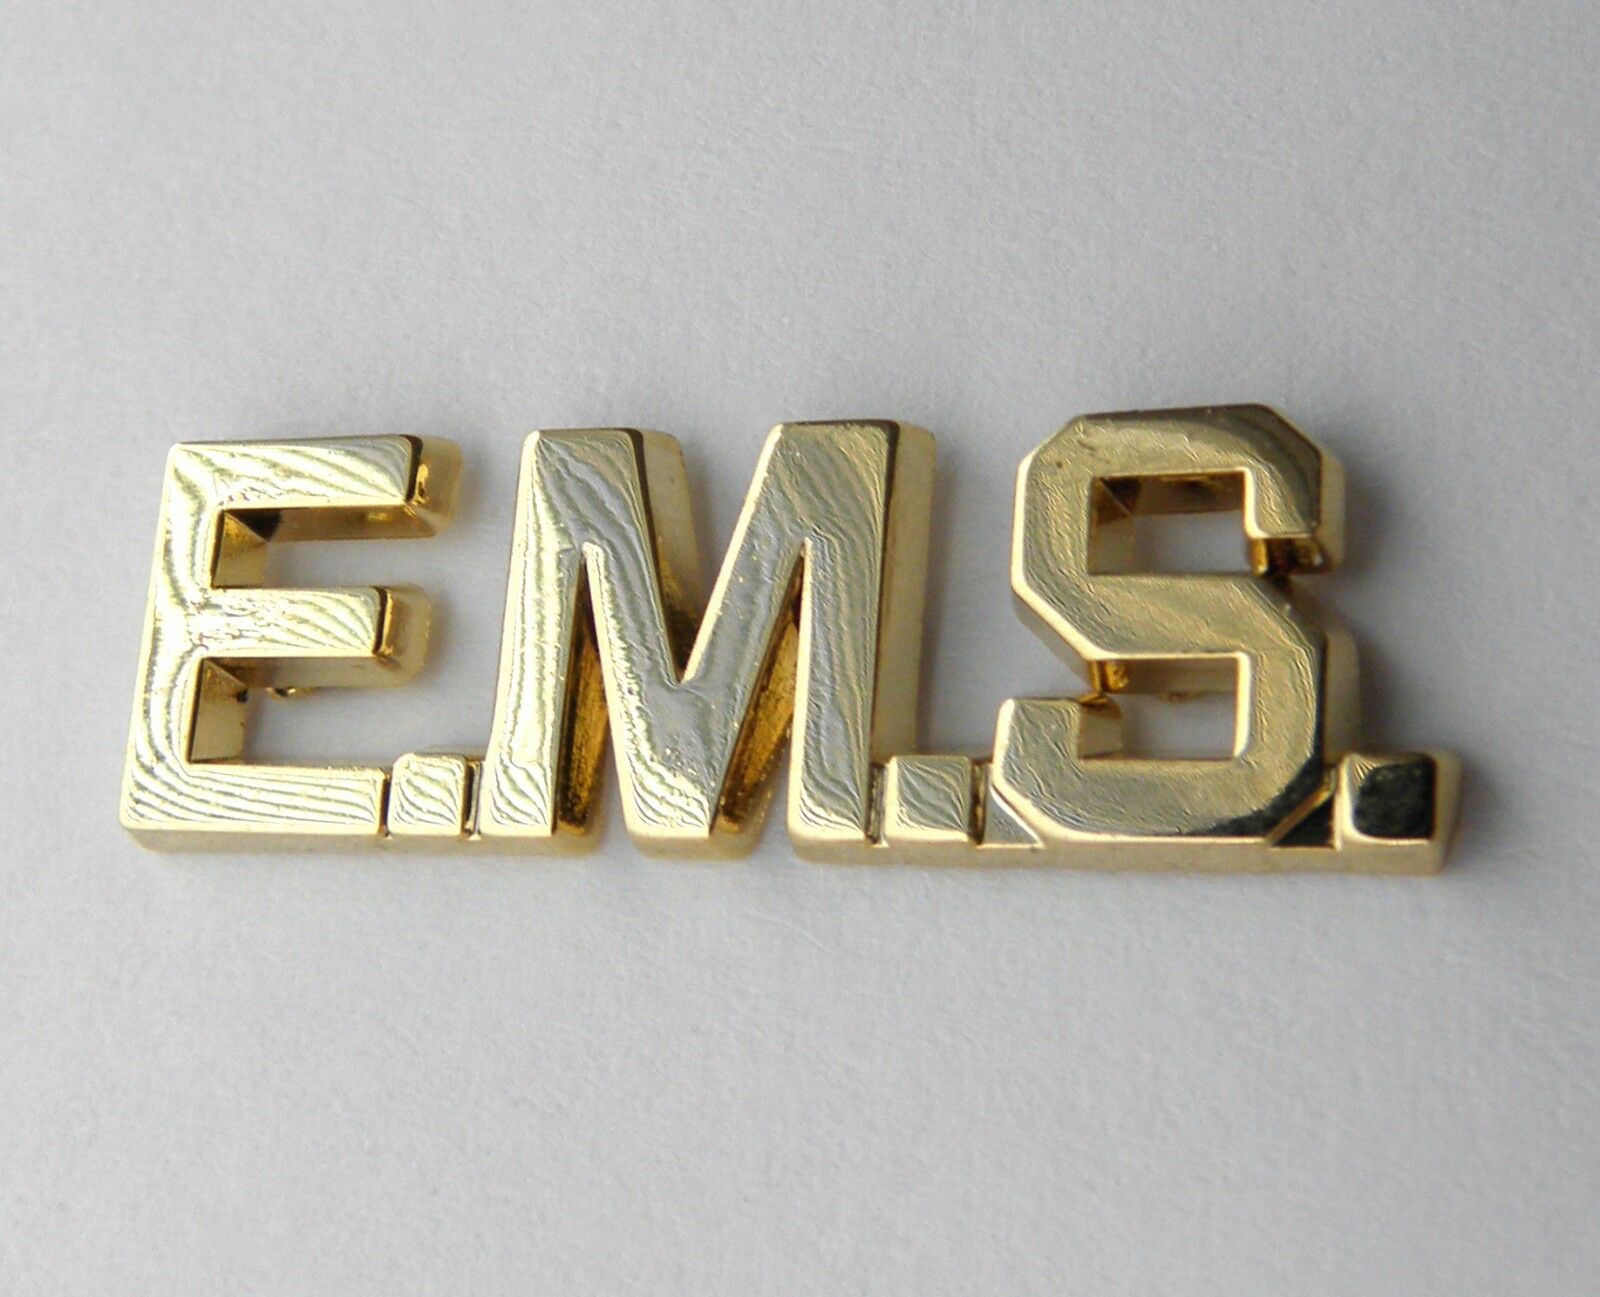 EMT EMERGENCY MEDICAL TECHNICIAN EMBROIDERED PATCH 3.5 X 2.5 INCHES 